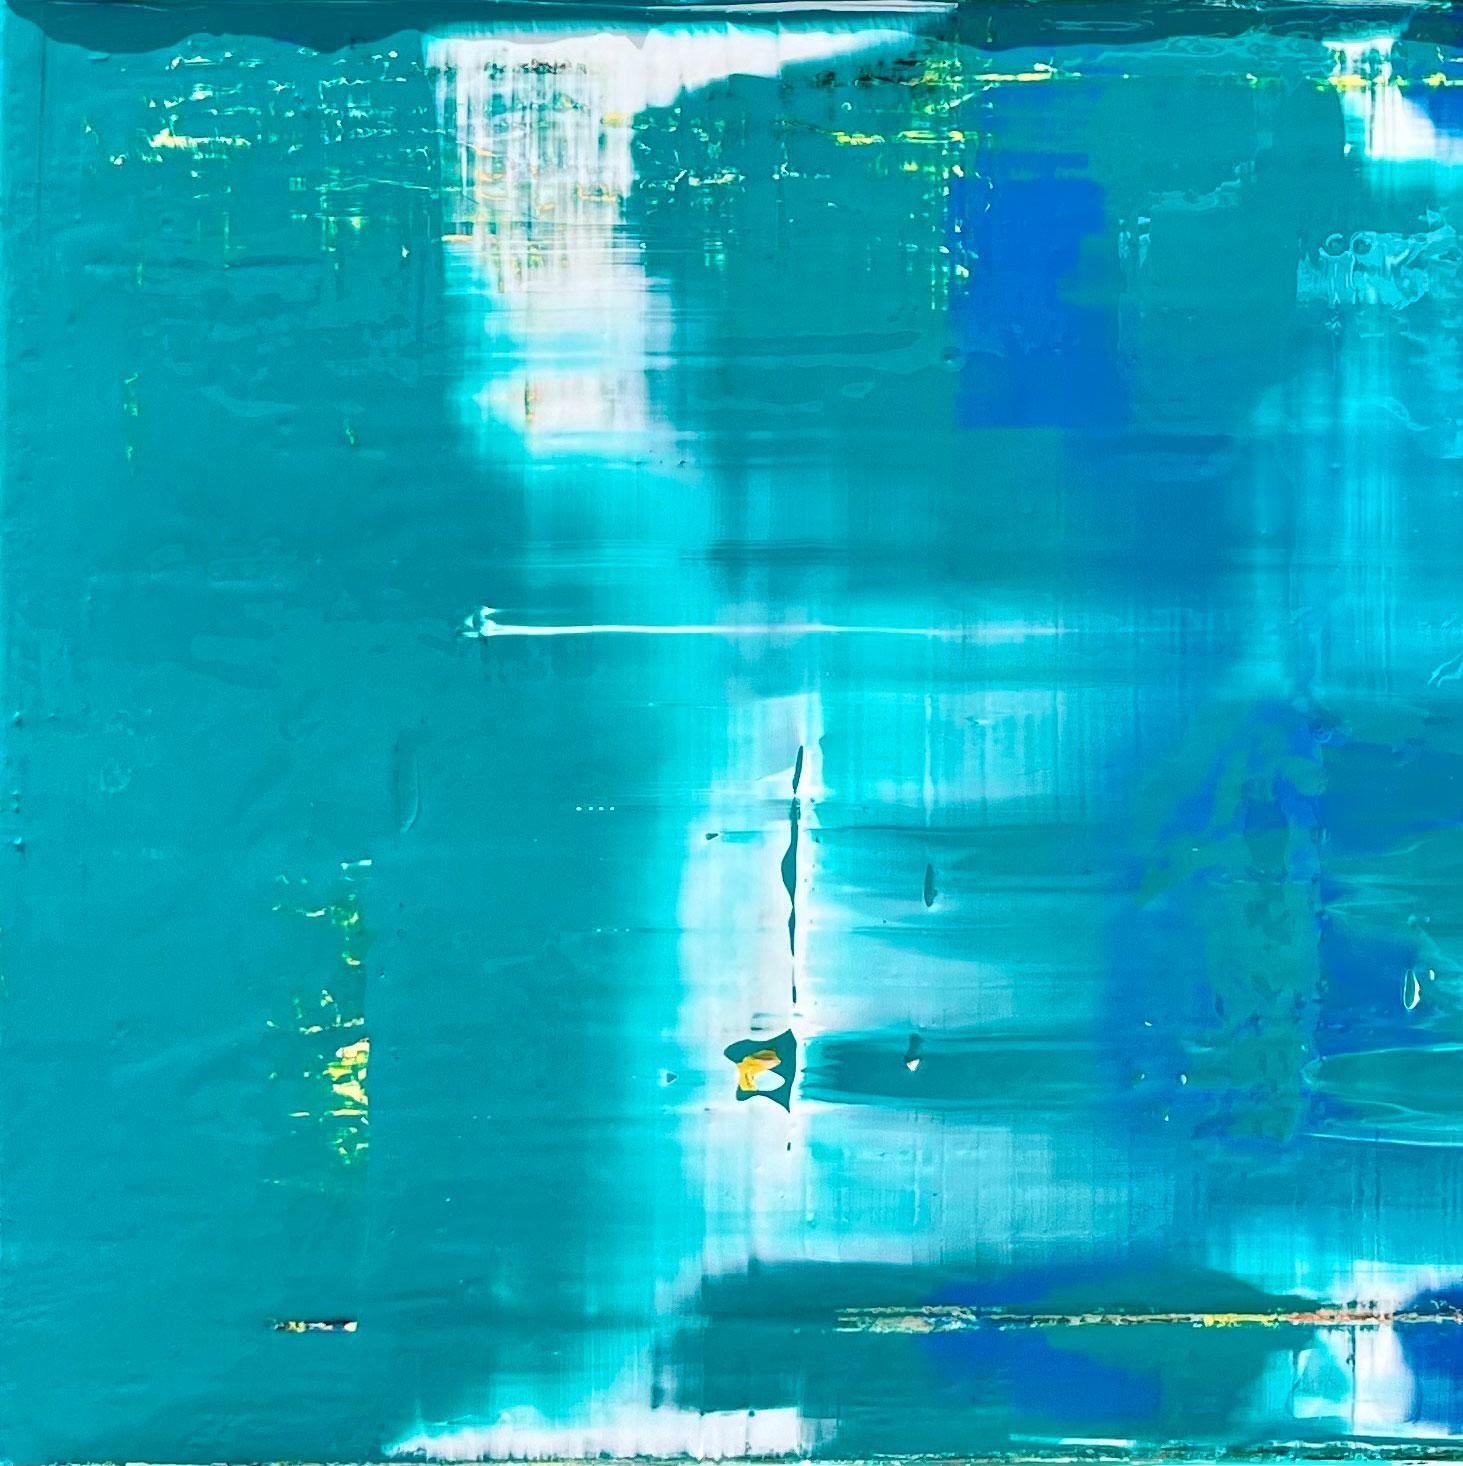 TITLE: Climate Change - Miami
ARTIST: Antonio Franchi
YEAR: 2022
CLASSIFICATION: Unique
MEDIUM TYPE: Painting
MEDIUM/MATERIALS: Acrylic and resin on canvas
DIMENSIONS: 100 x 100 cm

Always linked to the sea – to whose shades that embrace vast ranges